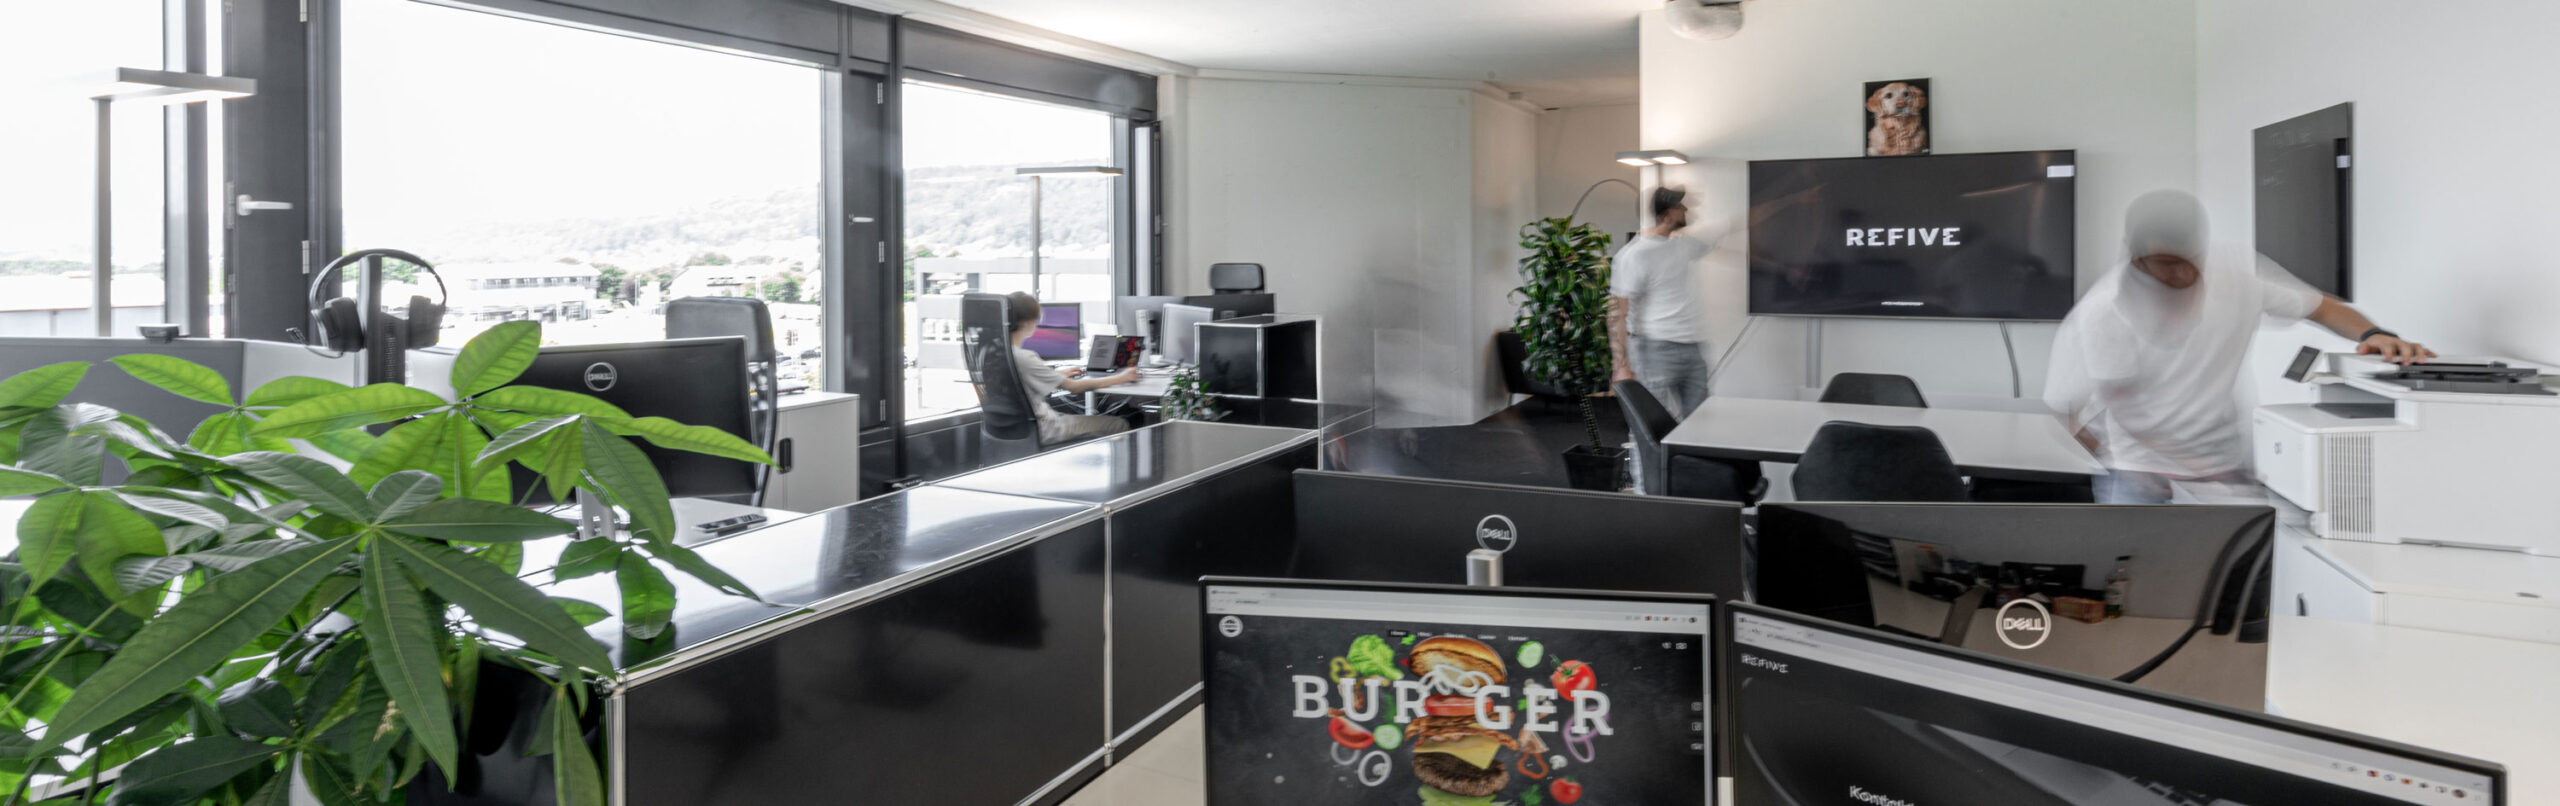 Cramped modest office space, the early collaborative workspace at REFIVE, where a small team of five laid the foundation for our industry strides.